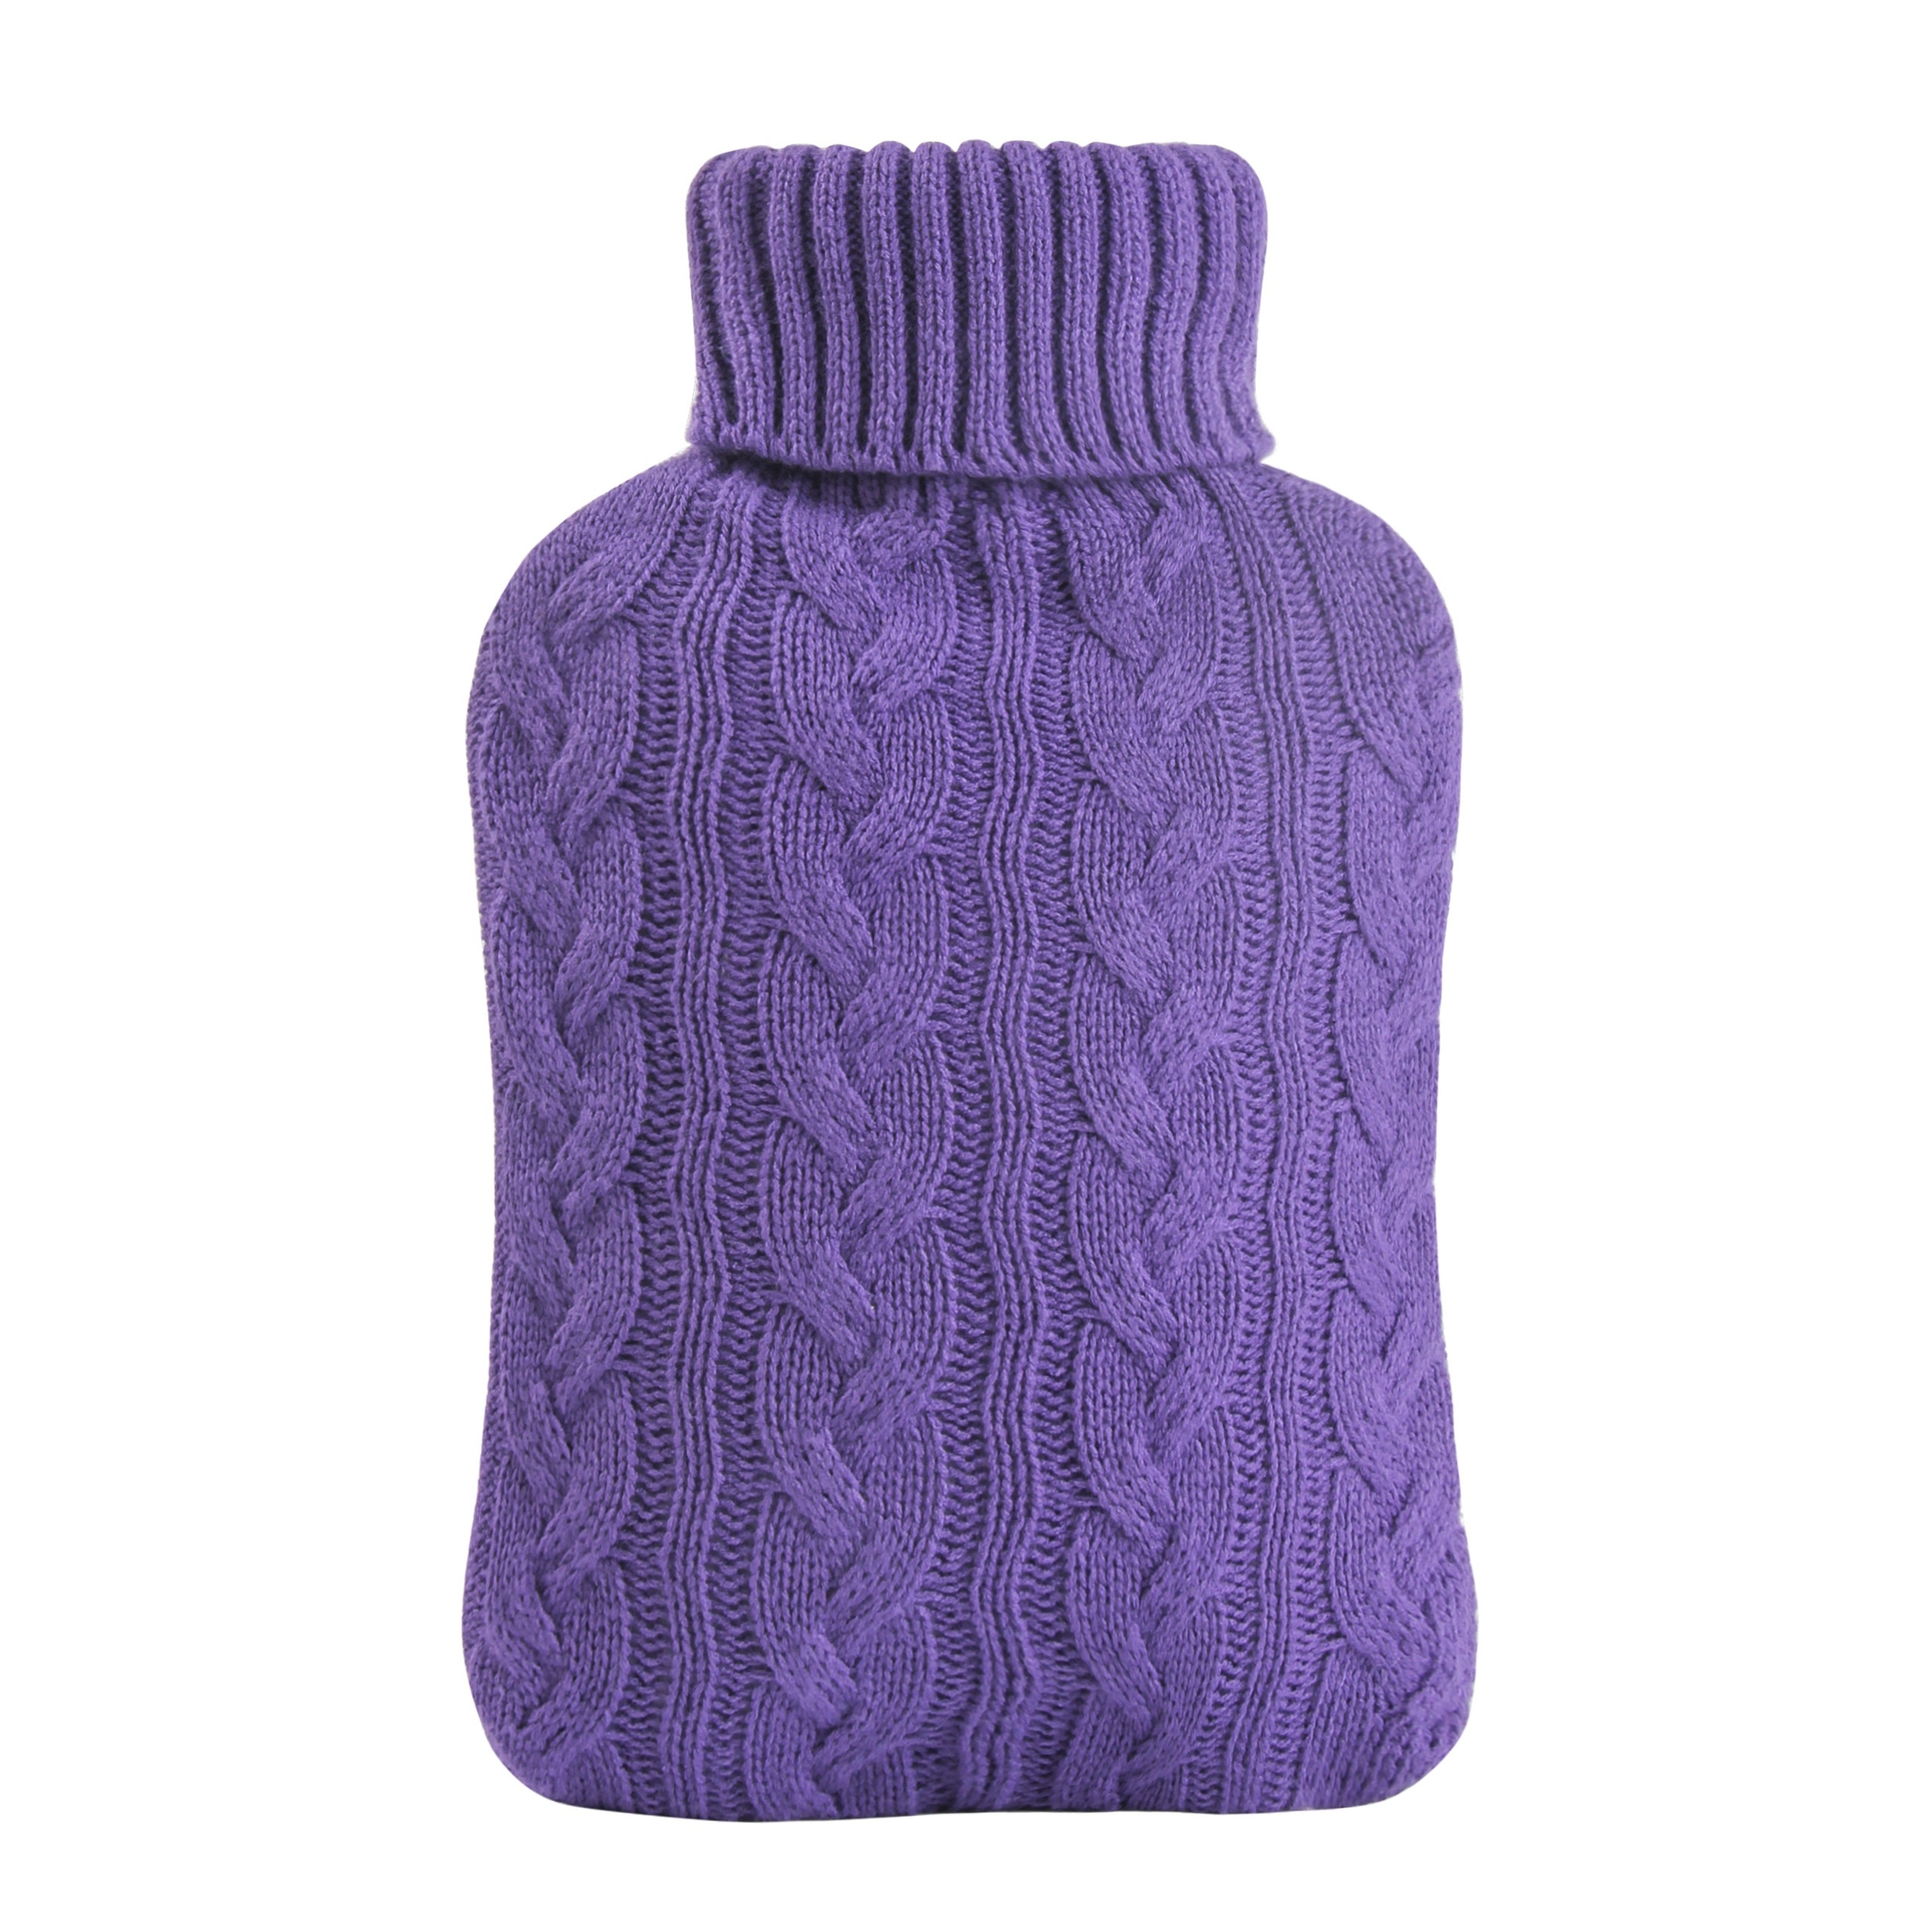 samply Hot Water Bottle with Knitted Cover, 2L Hot Water Bag for Hot and  Cold Compress, Hand Feet Warmer, Ideal for Menstrual Cramps, Neck and